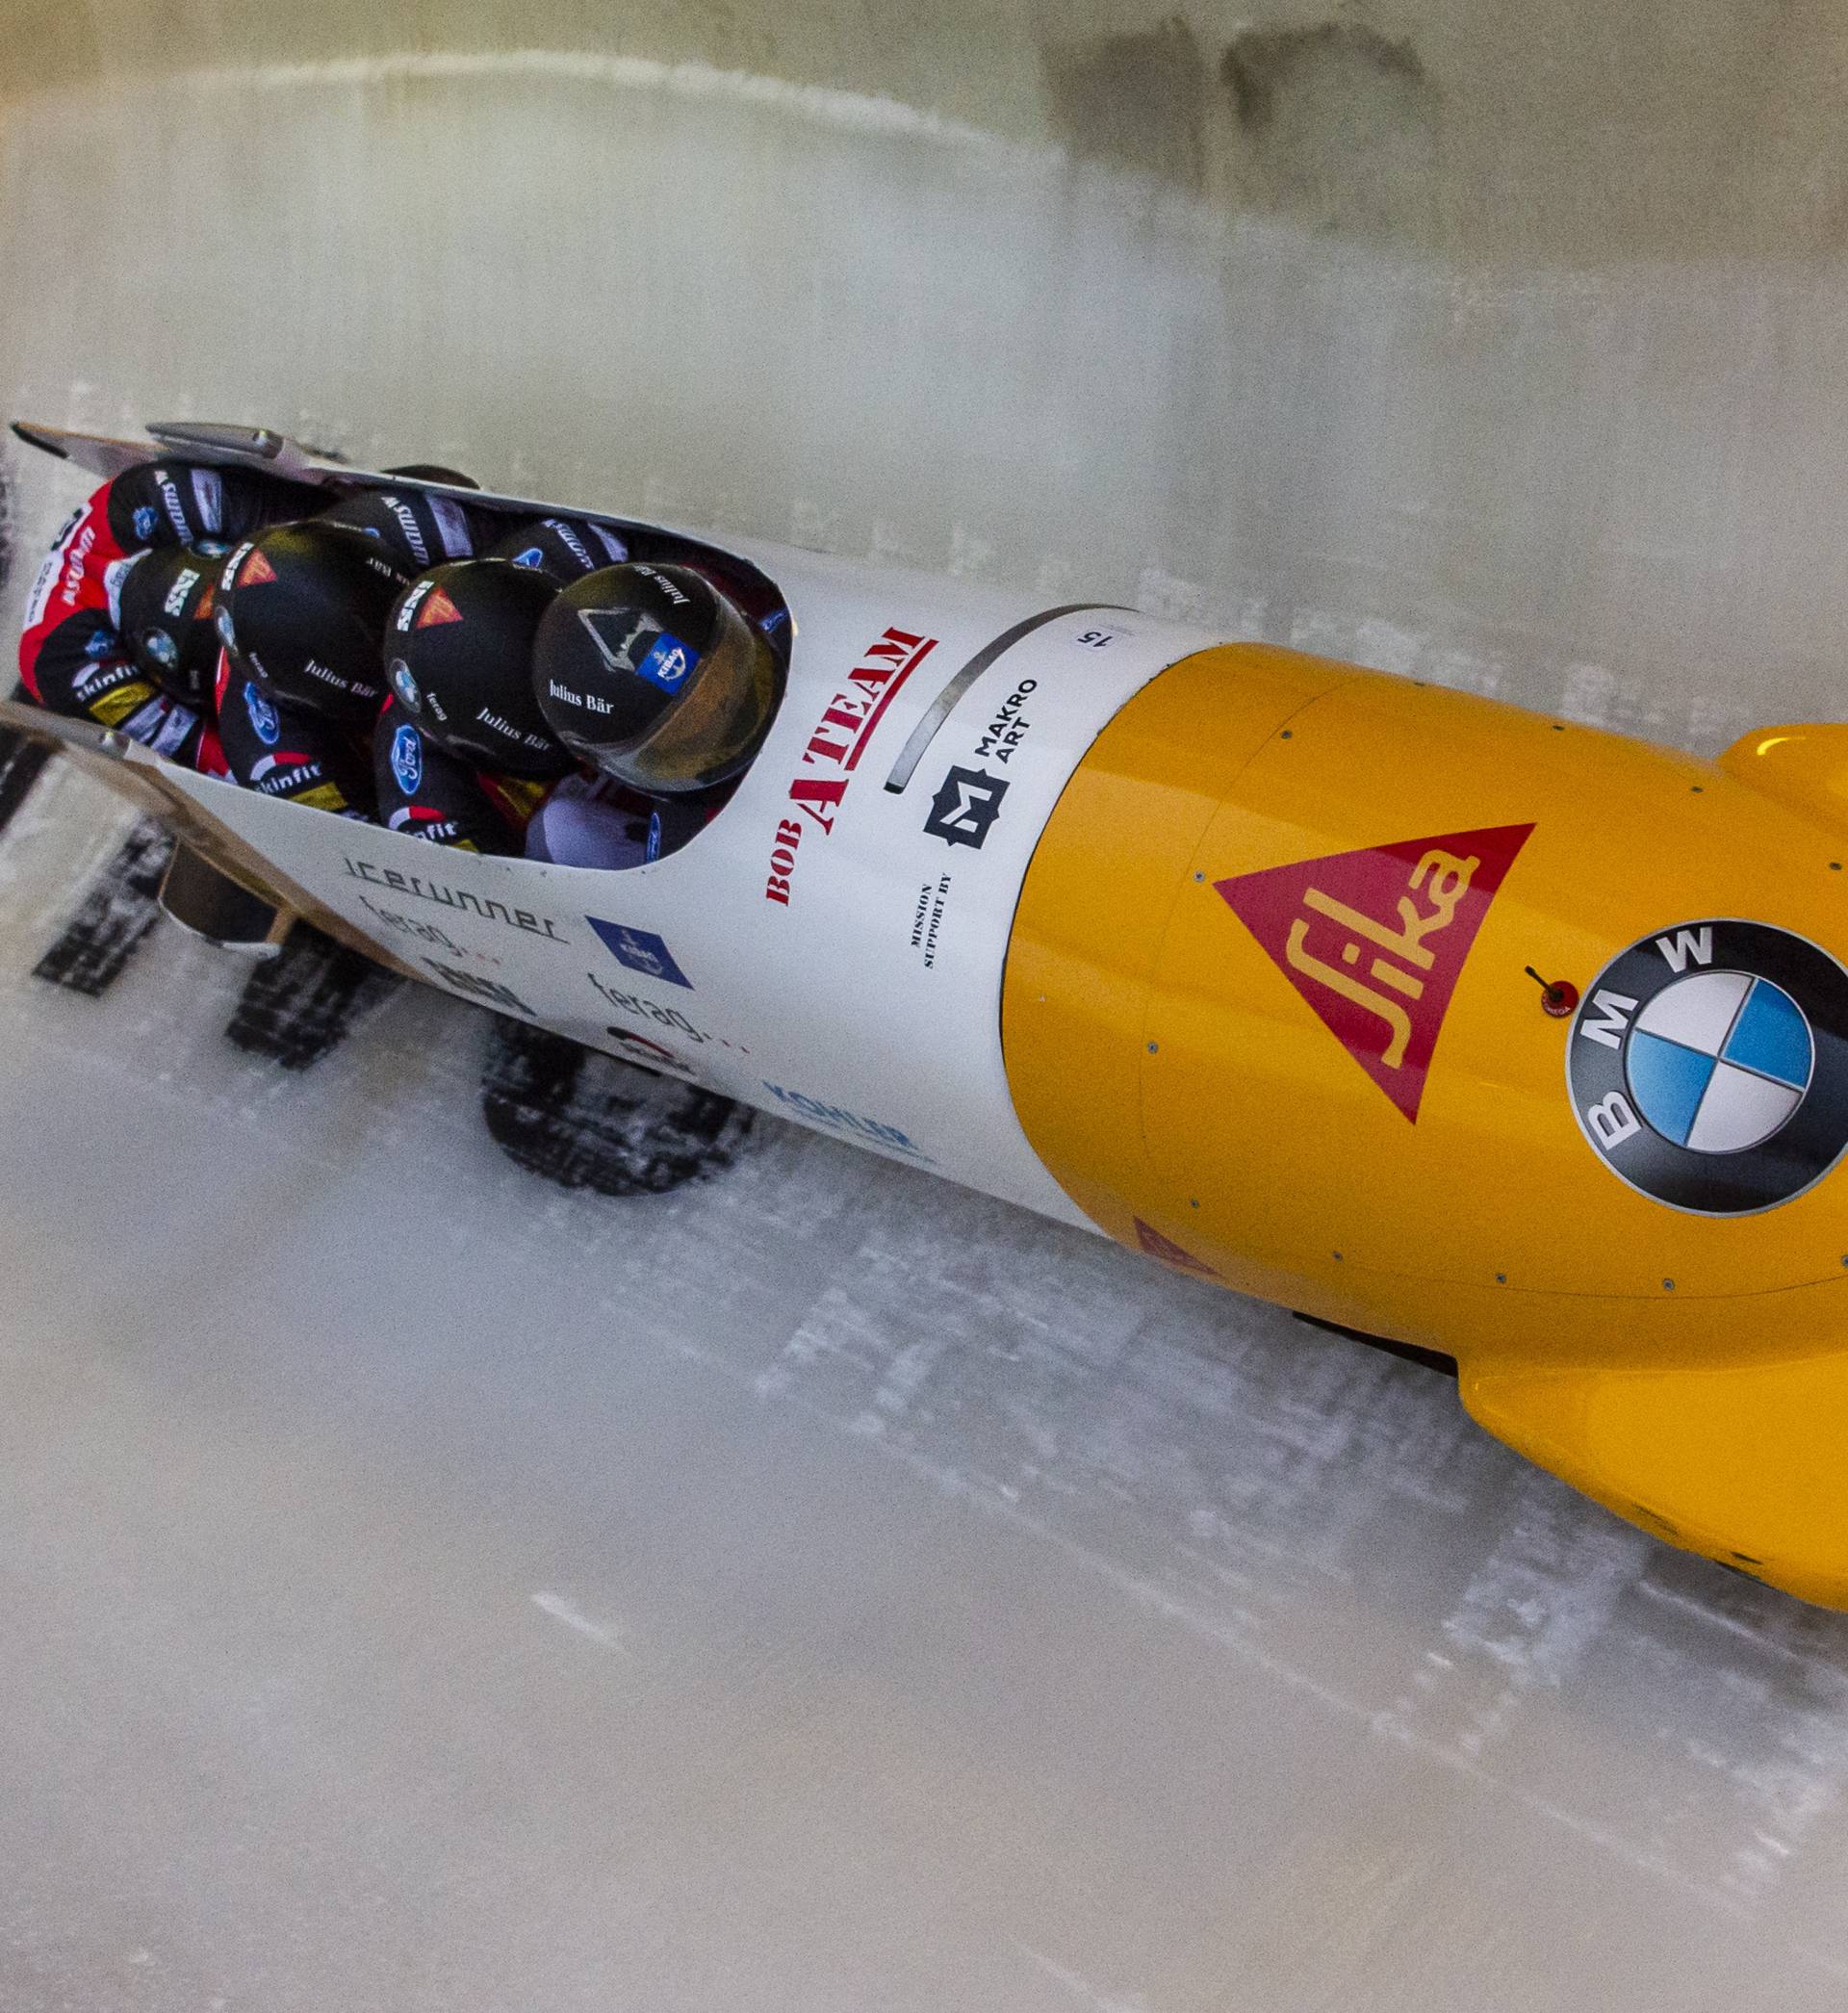 Bobsleigh World Cup in Winterberg